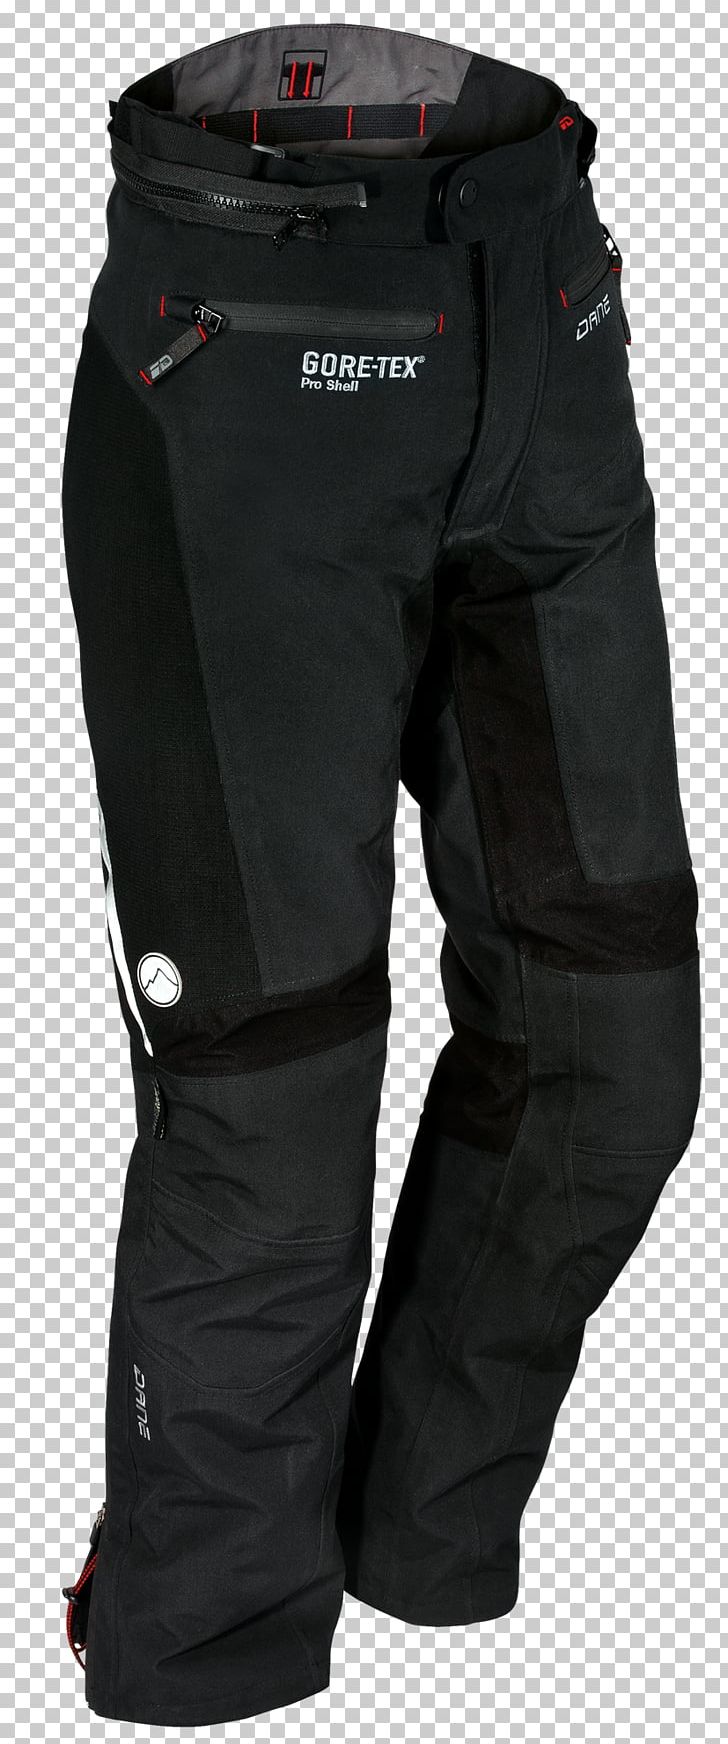 Shell Gore-Tex Pants Motorcycle Personal Protective Equipment Textile PNG, Clipart, Black, Breathability, Clothing, Denmark, Goretex Free PNG Download